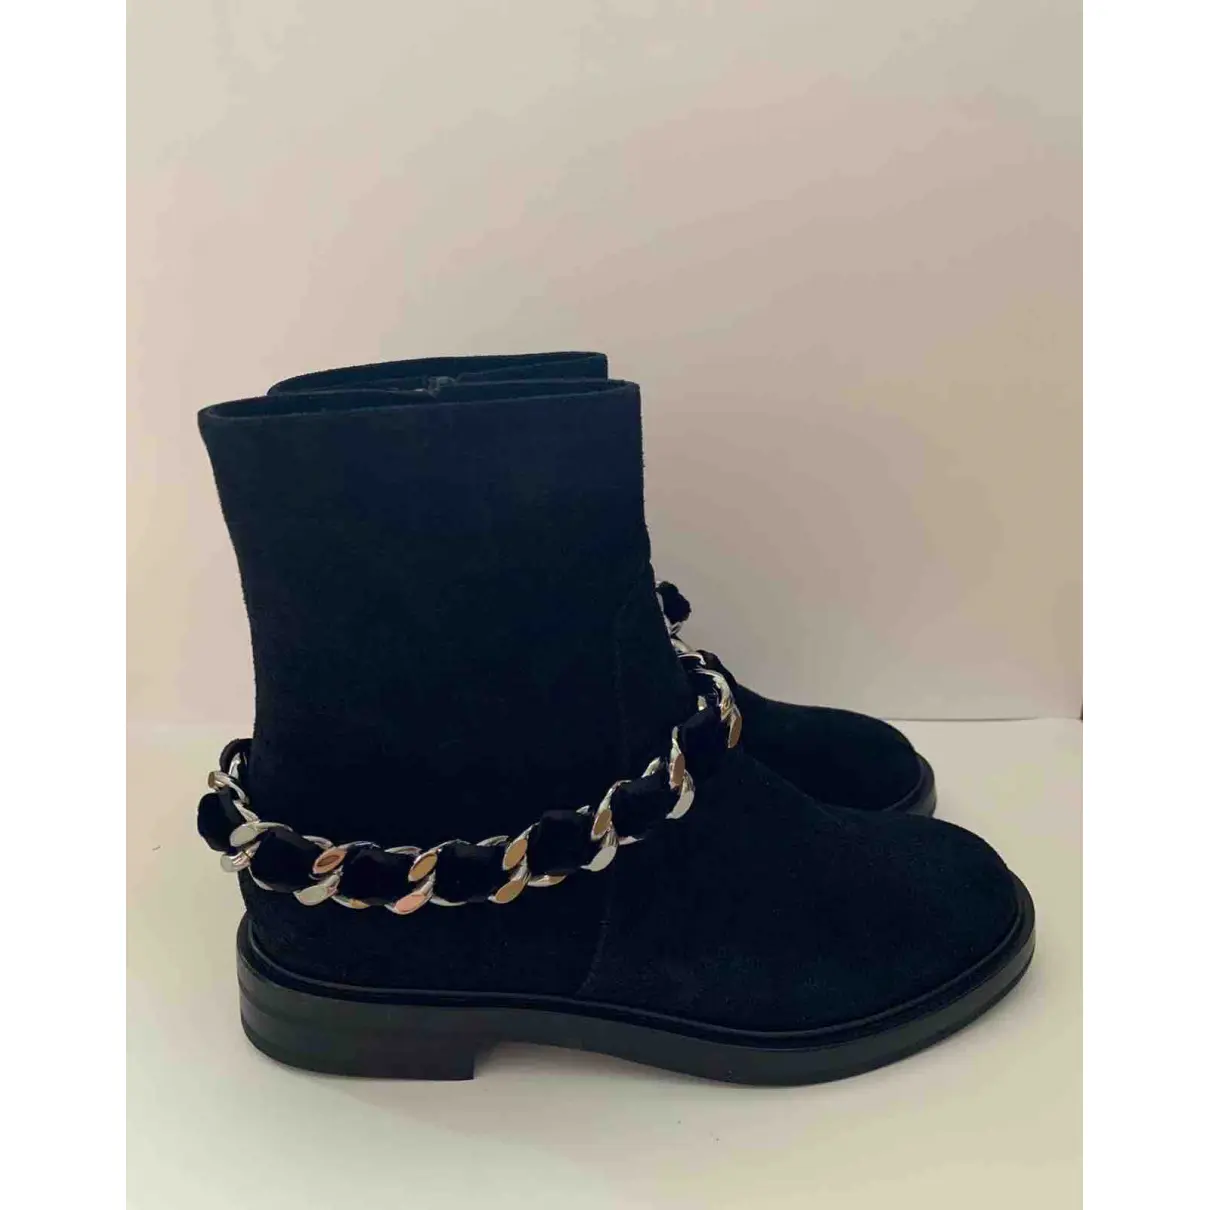 Buy Casadei Ankle boots online